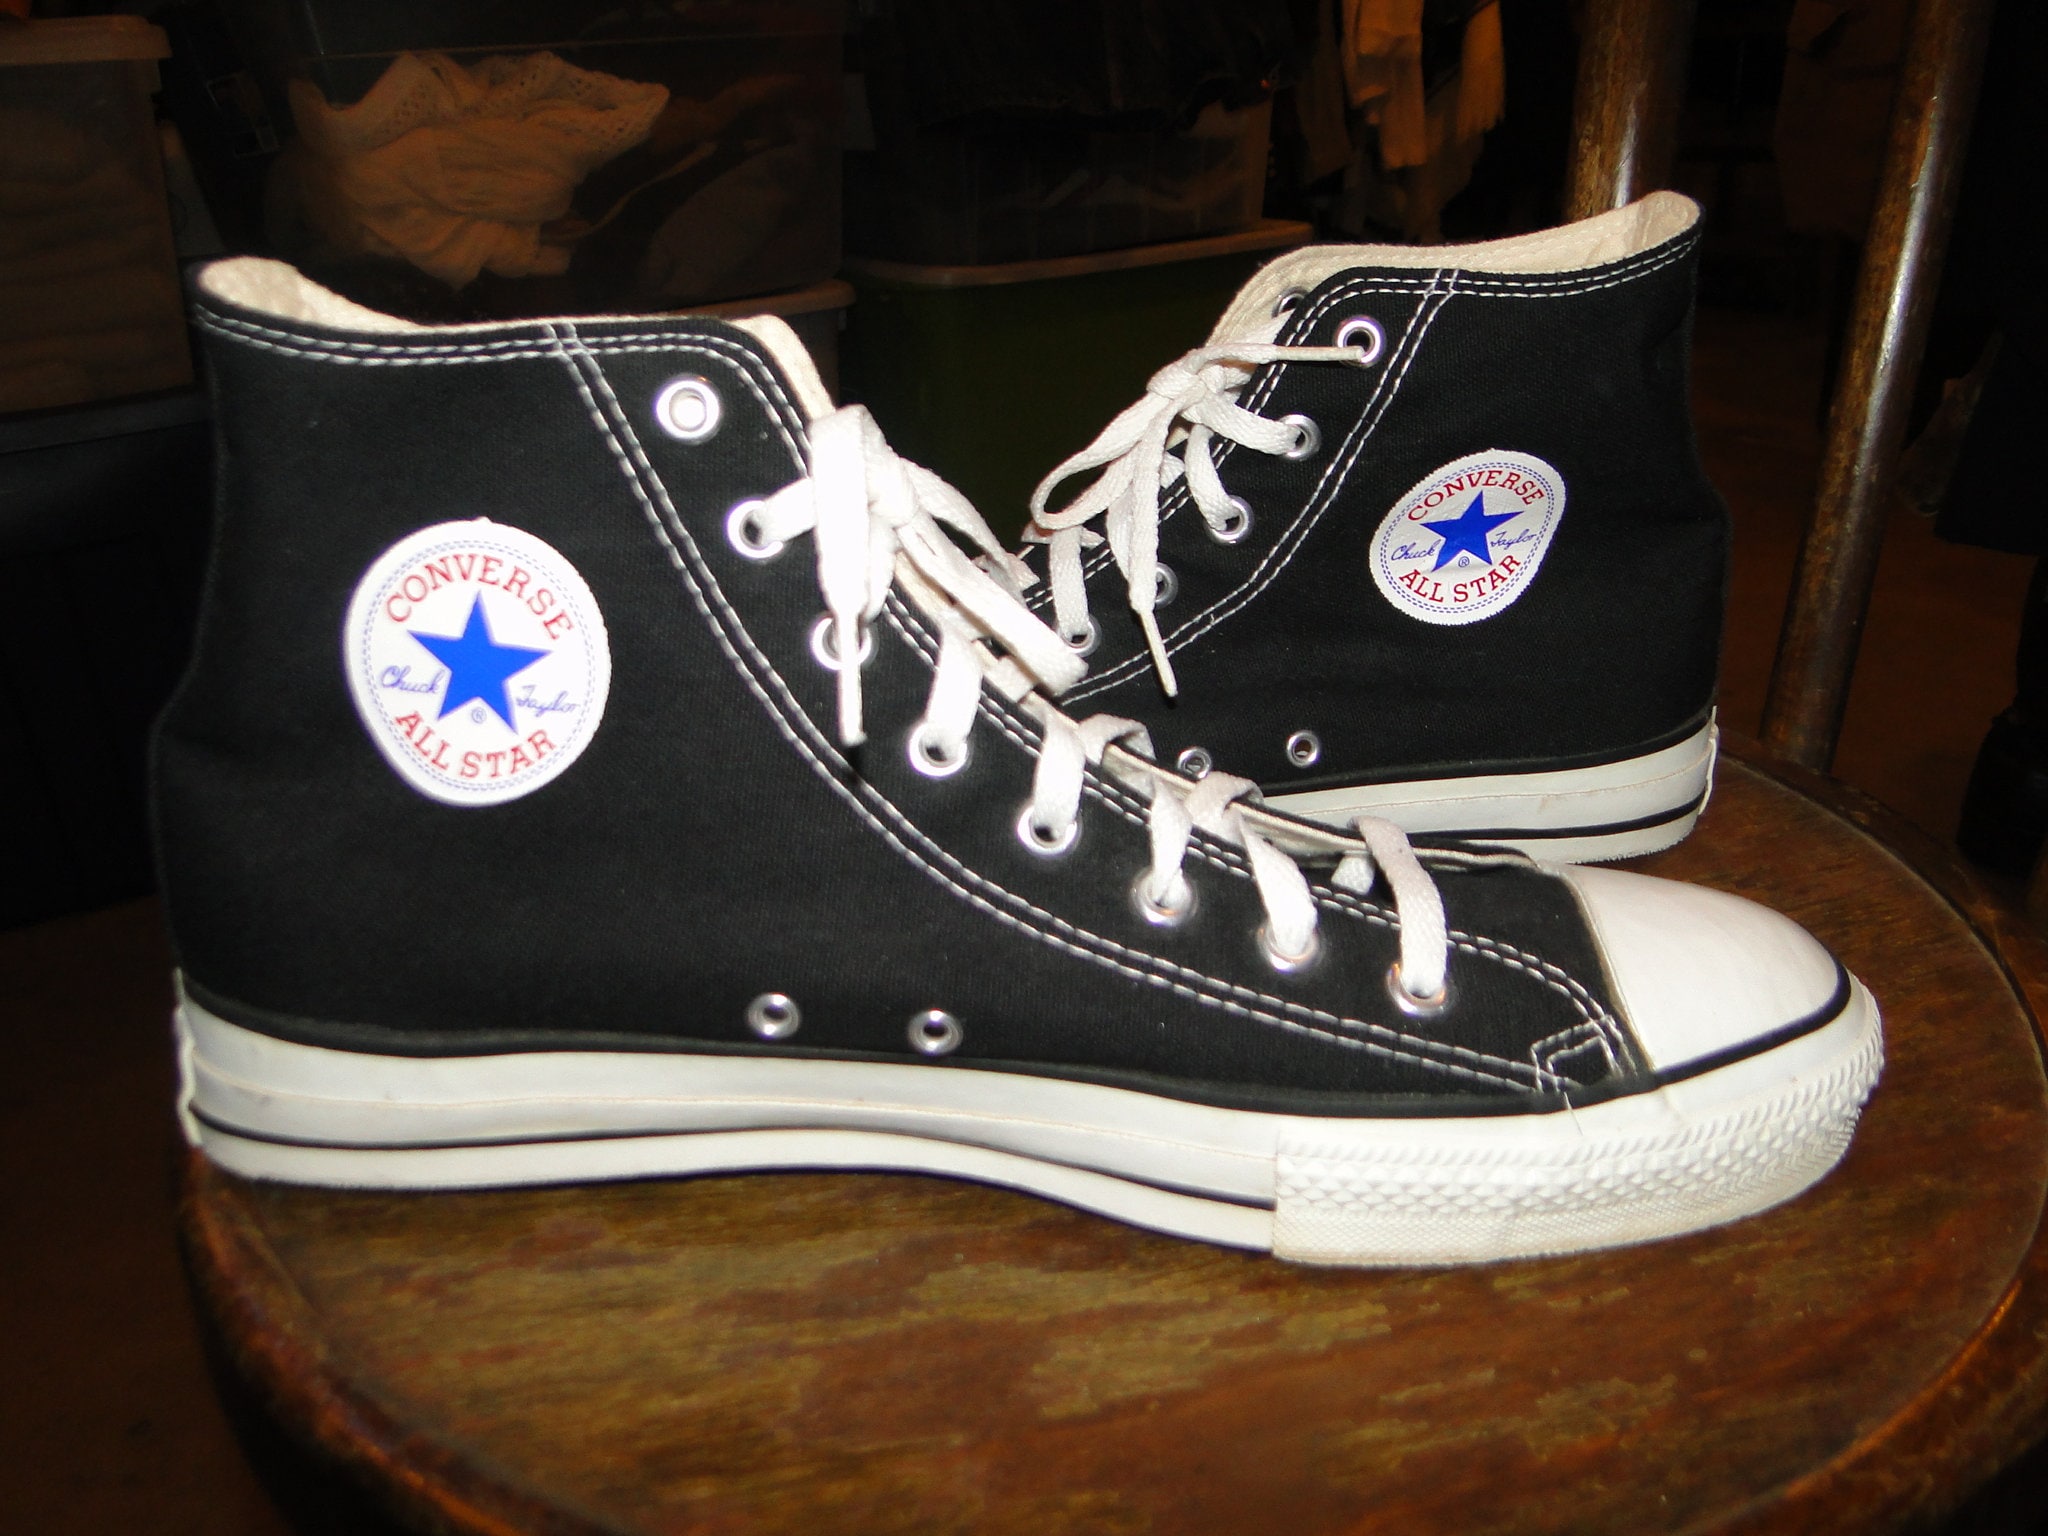 Vintage Black Converse All Star Chuck Taylor Shoes, Hi Tops, Made in USA  Sz11.5 - Etsy Sweden